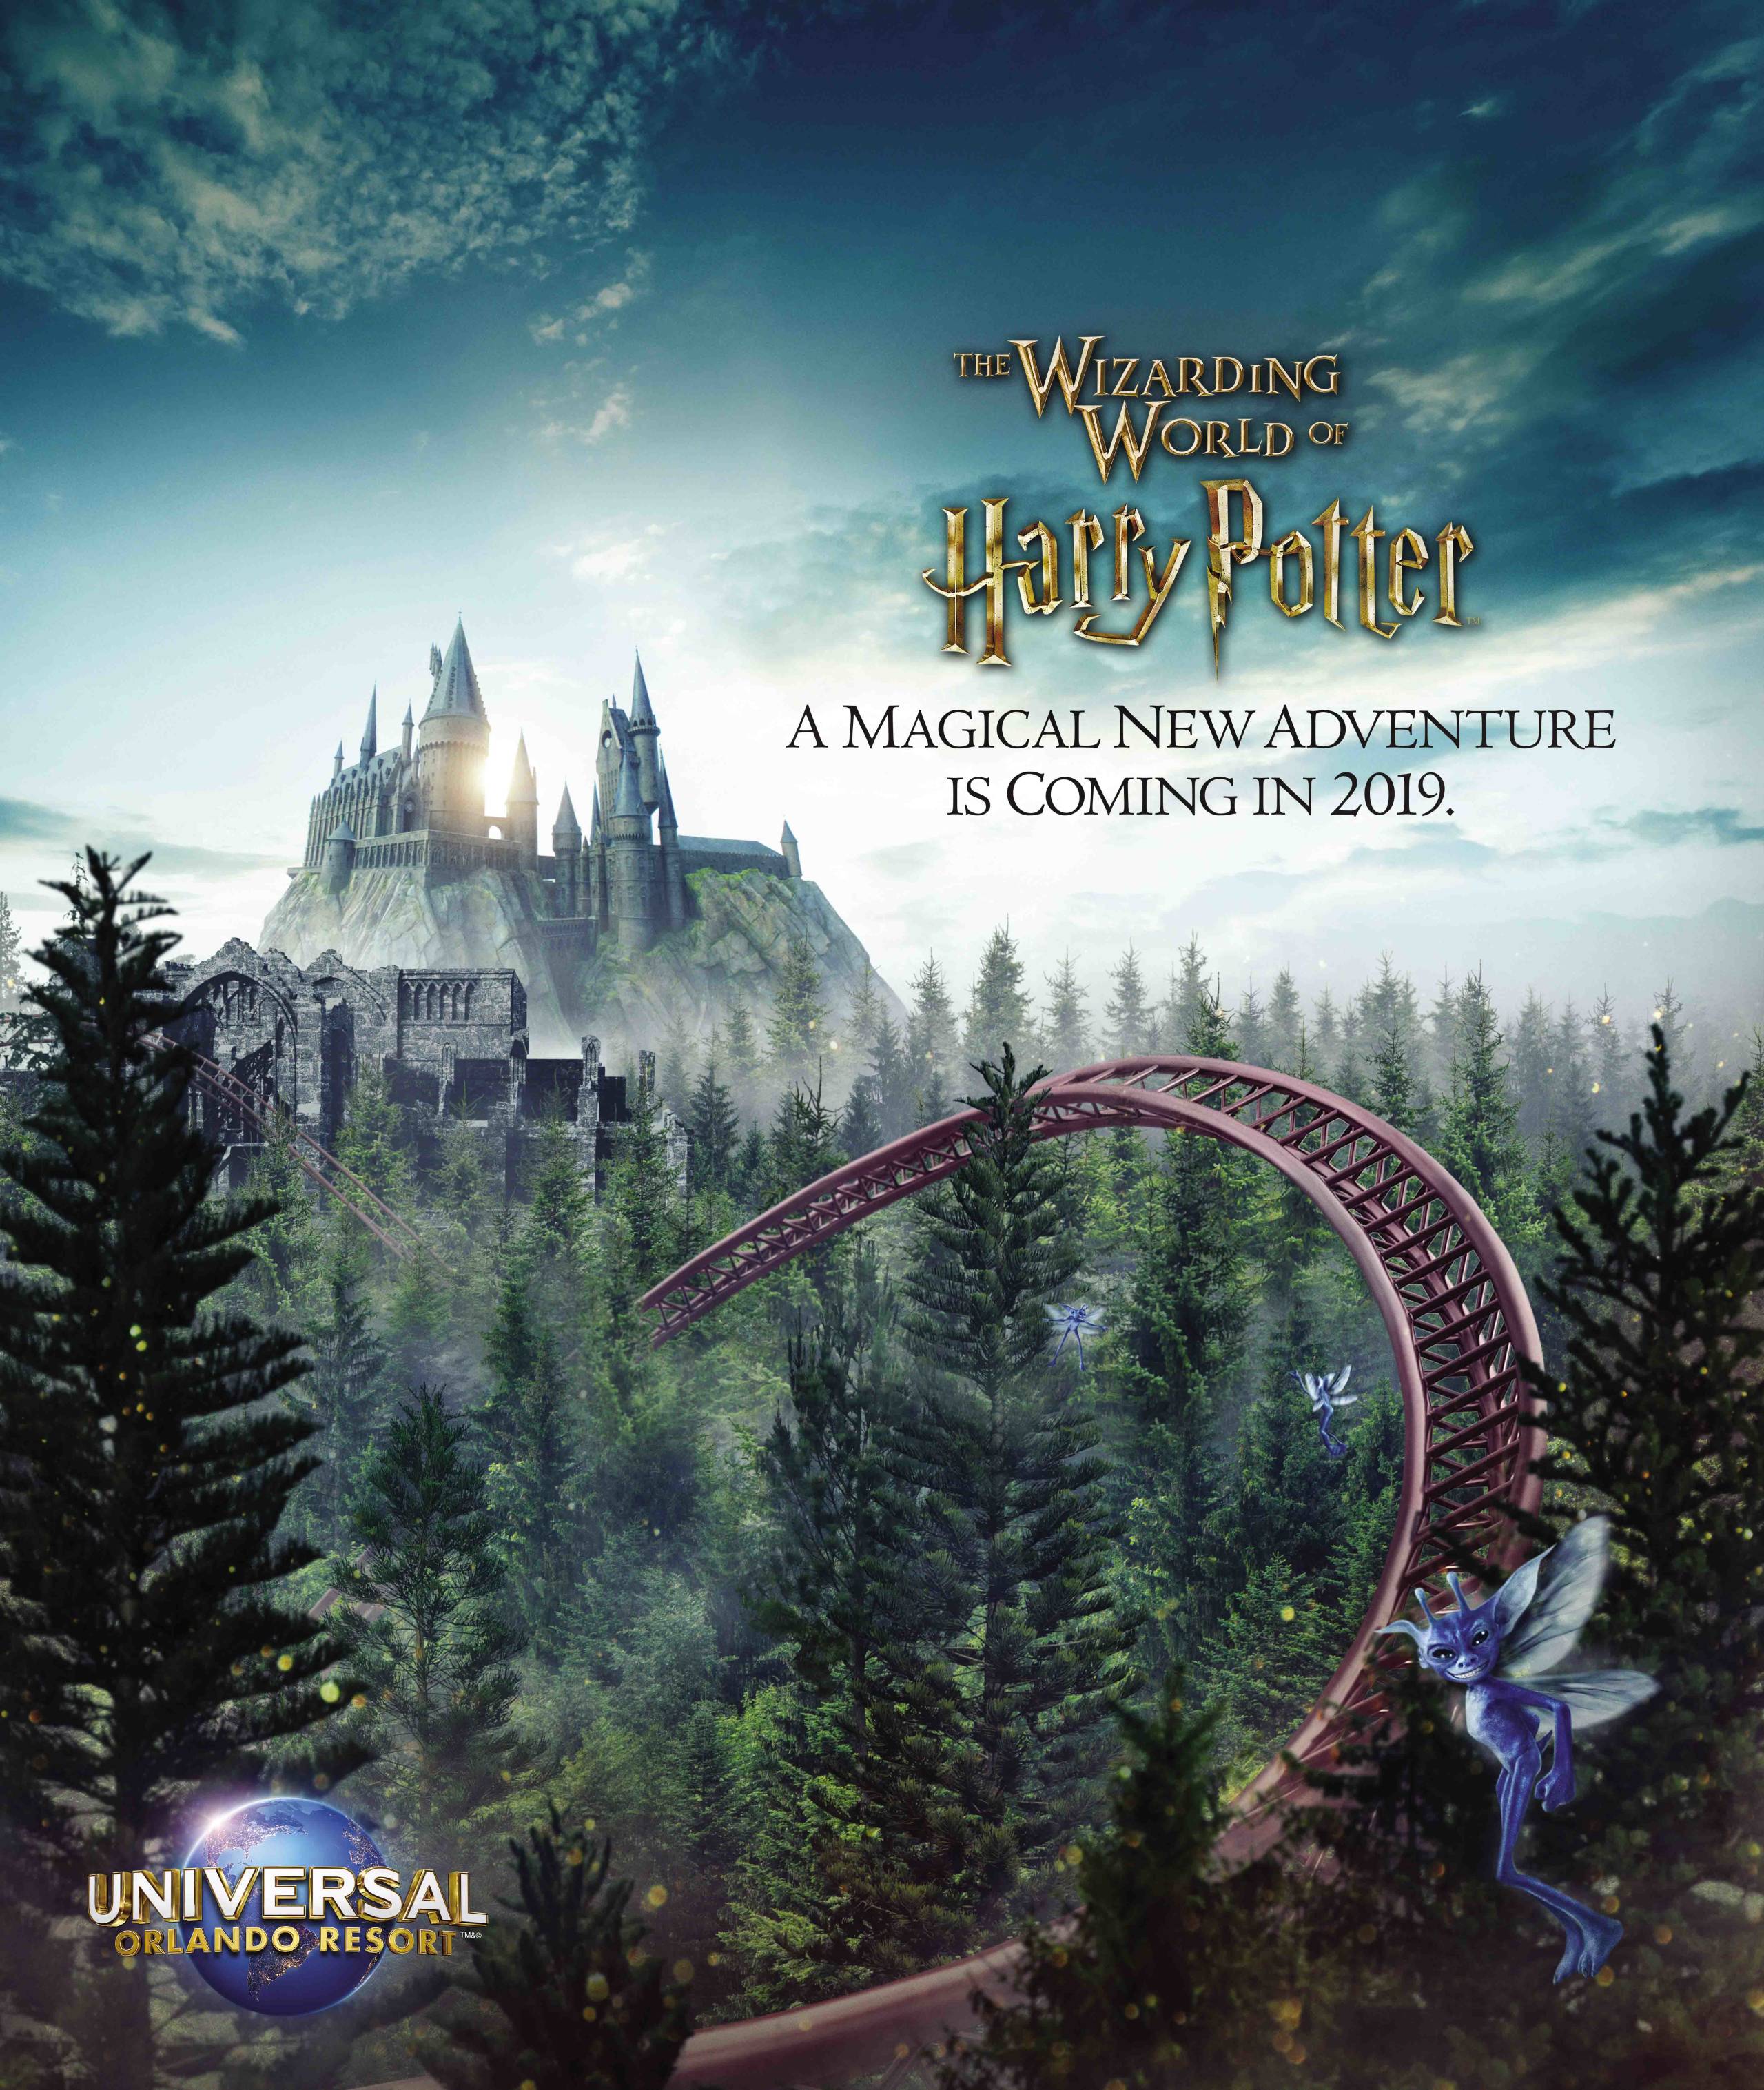 Universal Orlando Resort Shares First Glimpse of New Coaster Experience Coming to The Wizarding World of Harry Potter in 2019